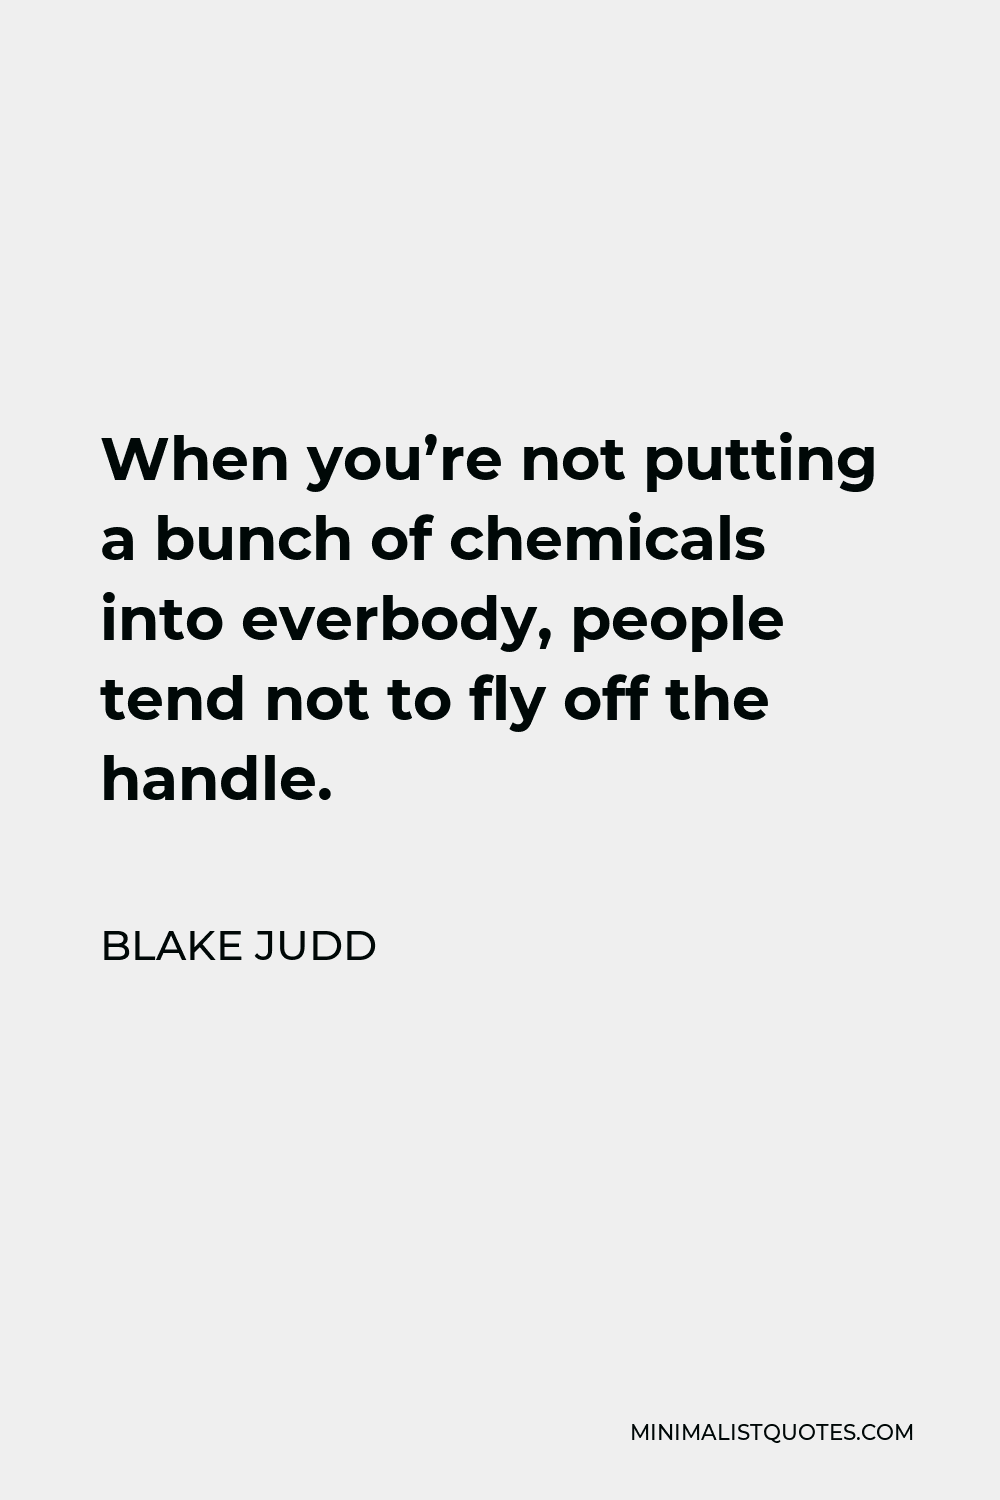 Blake Judd Quote - When you’re not putting a bunch of chemicals into everbody, people tend not to fly off the handle.